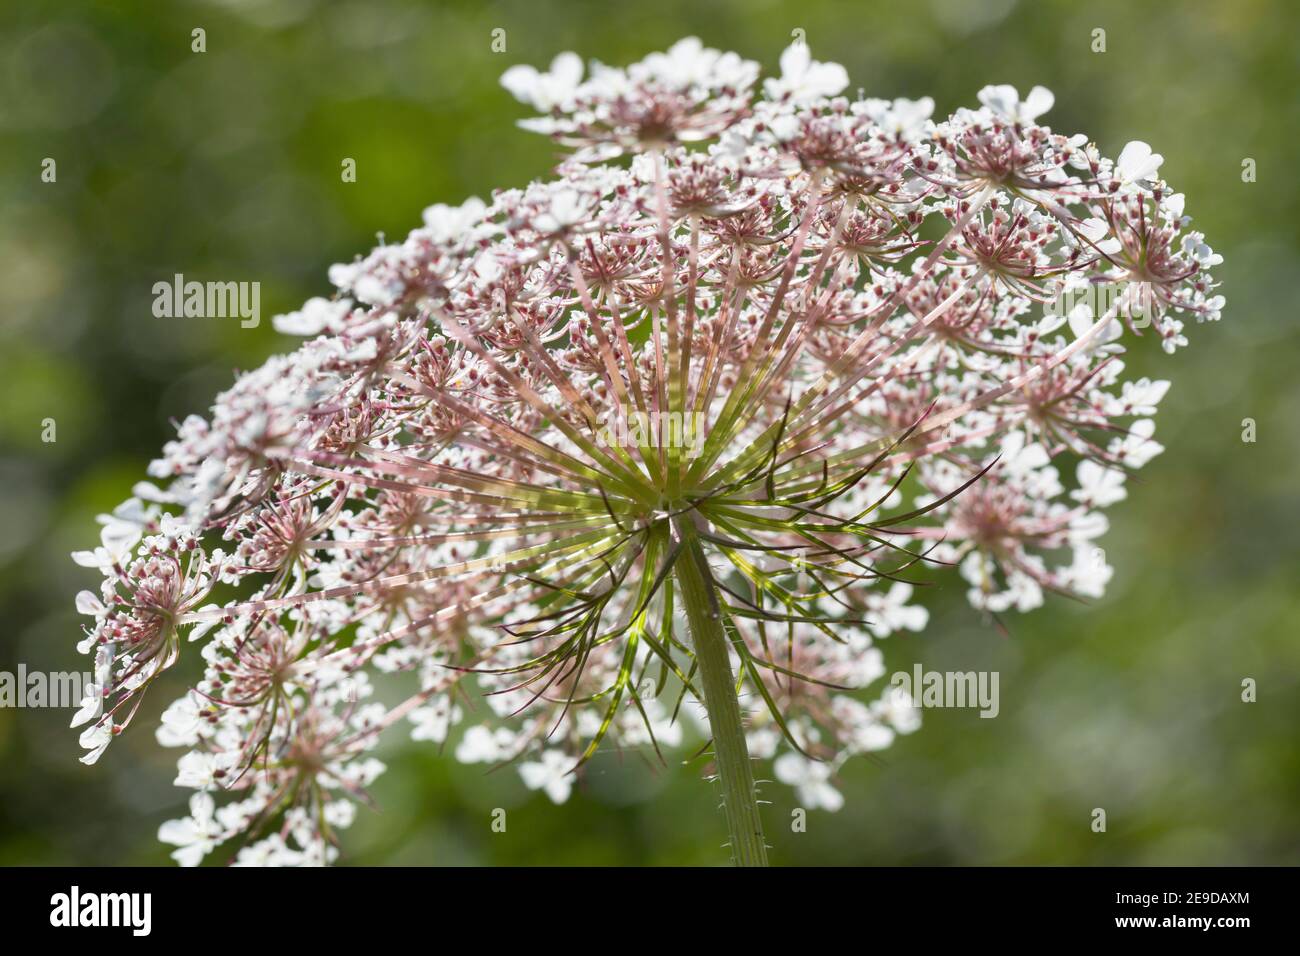 Queen Anne's lace, wild carrot (Daucus carota), umbel, Germany Stock Photo